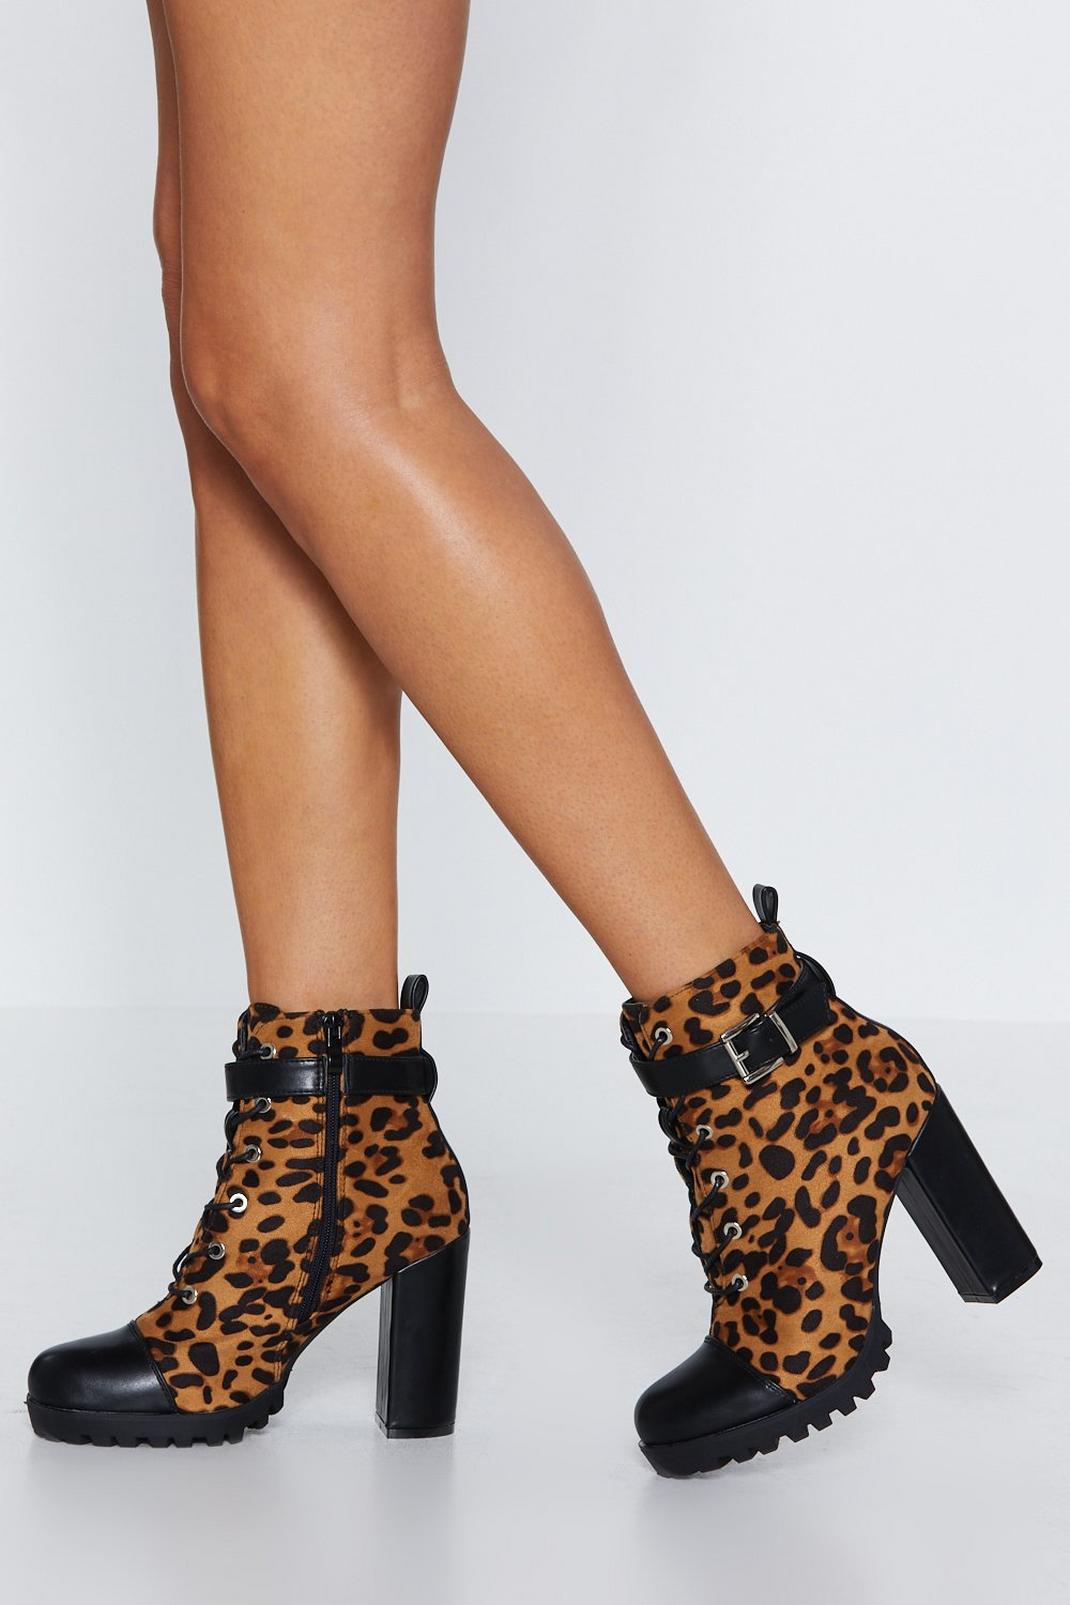 Show and Tail Leopard Biker Boot | Nasty Gal